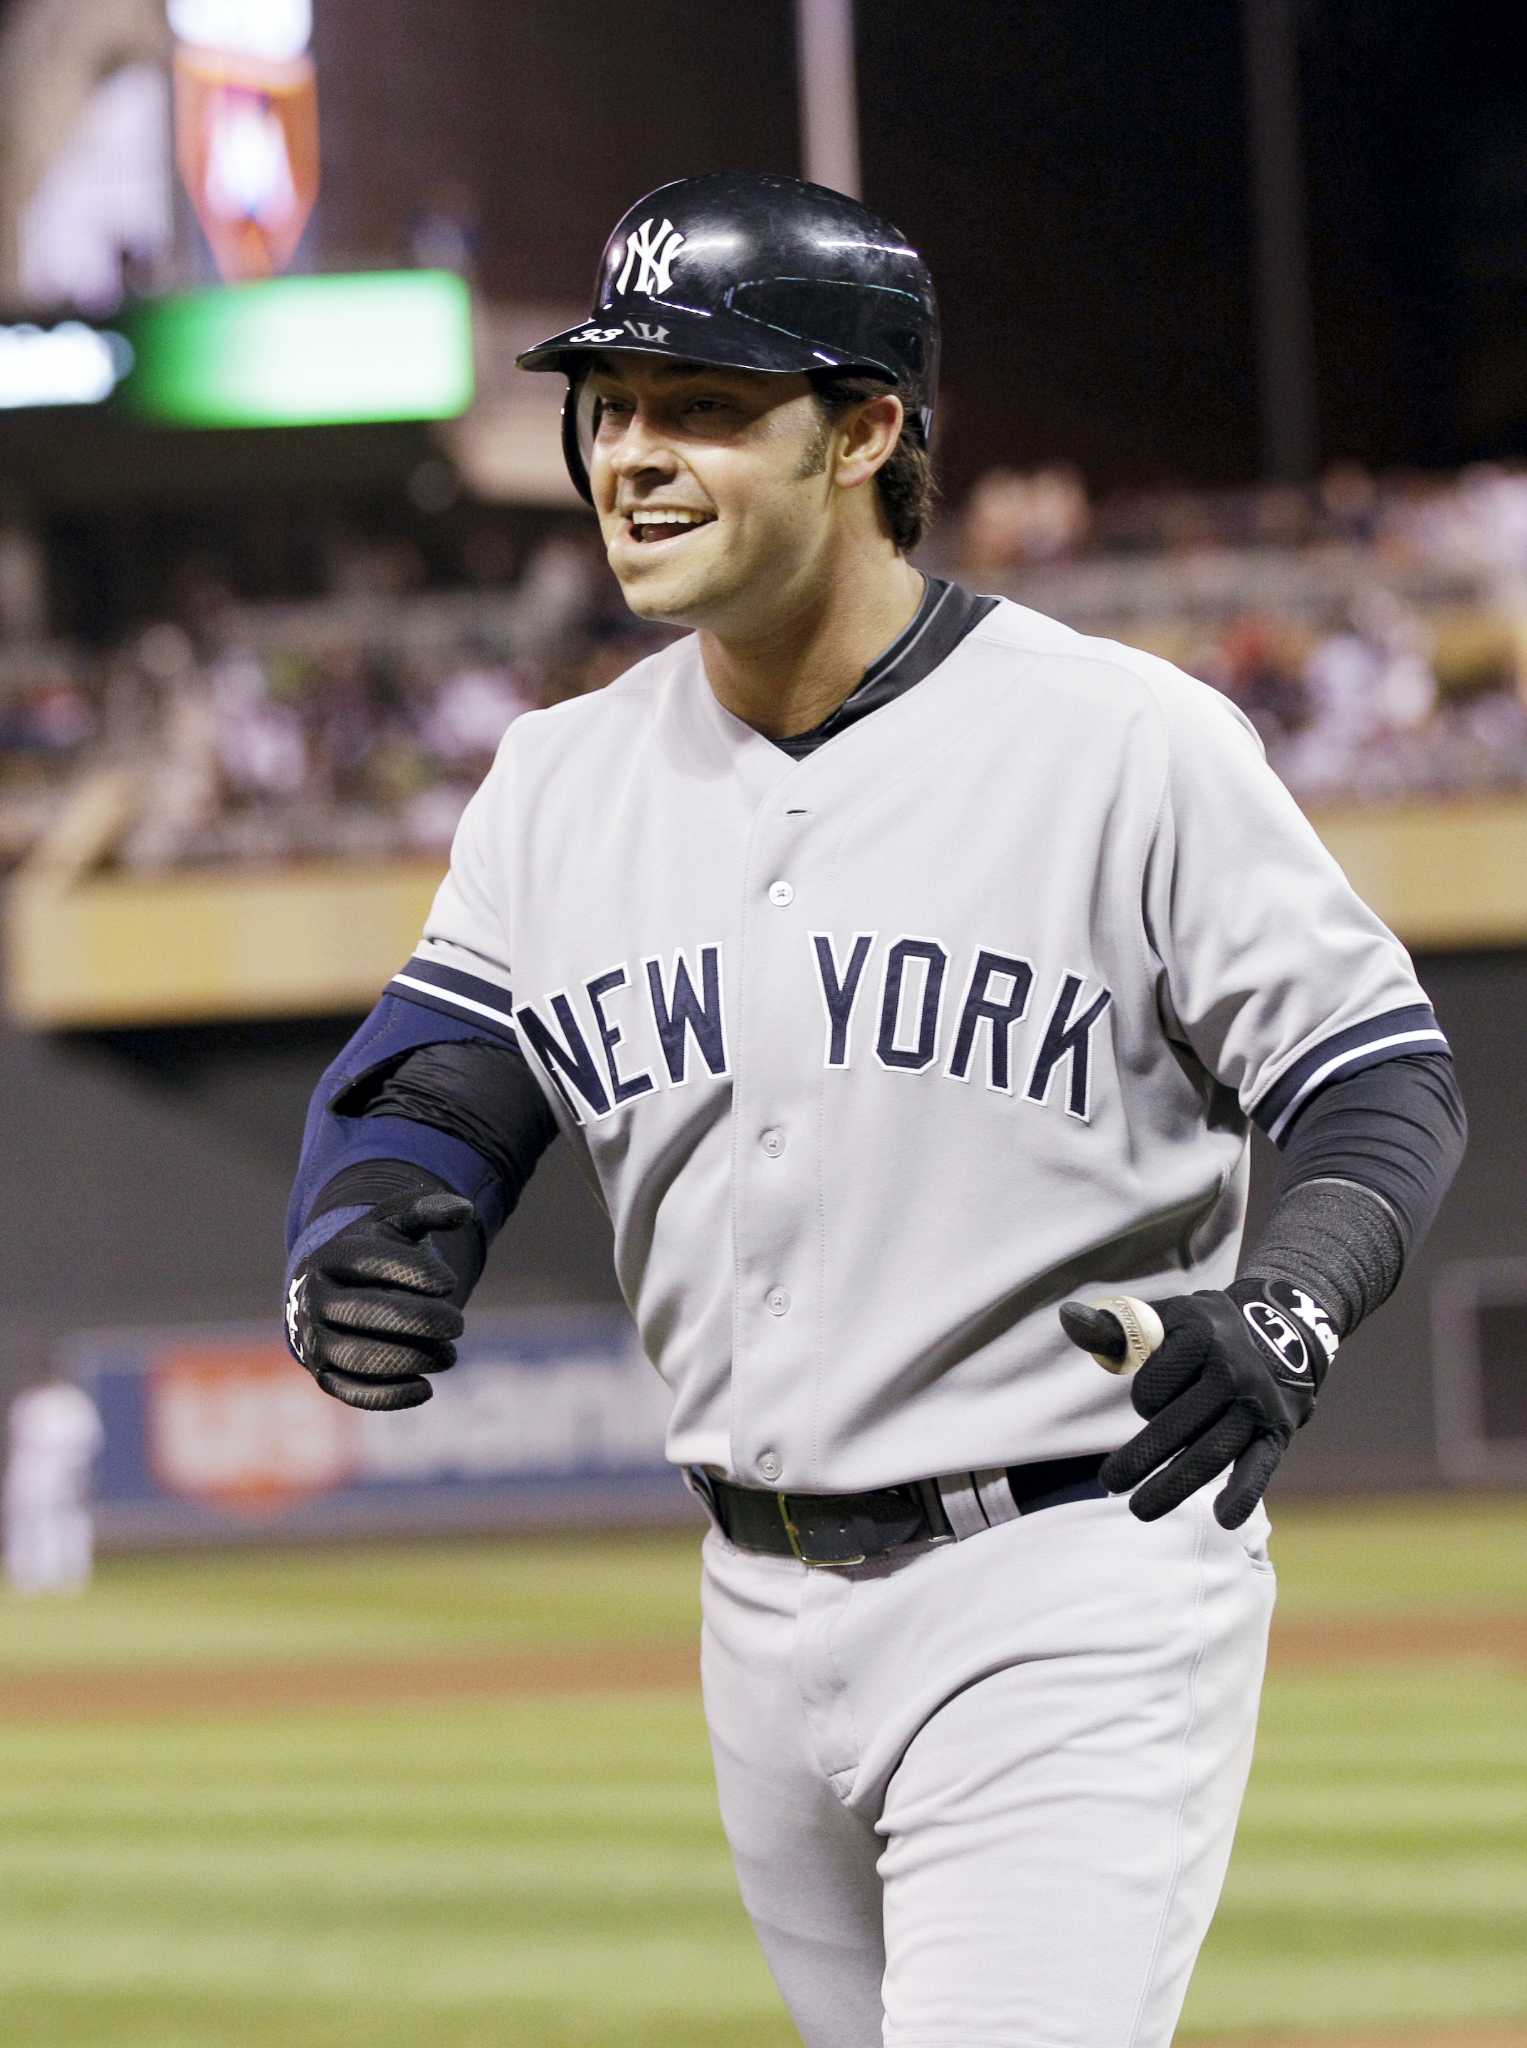 Nick Swisher opts out of deal with Yankees after birth of second child